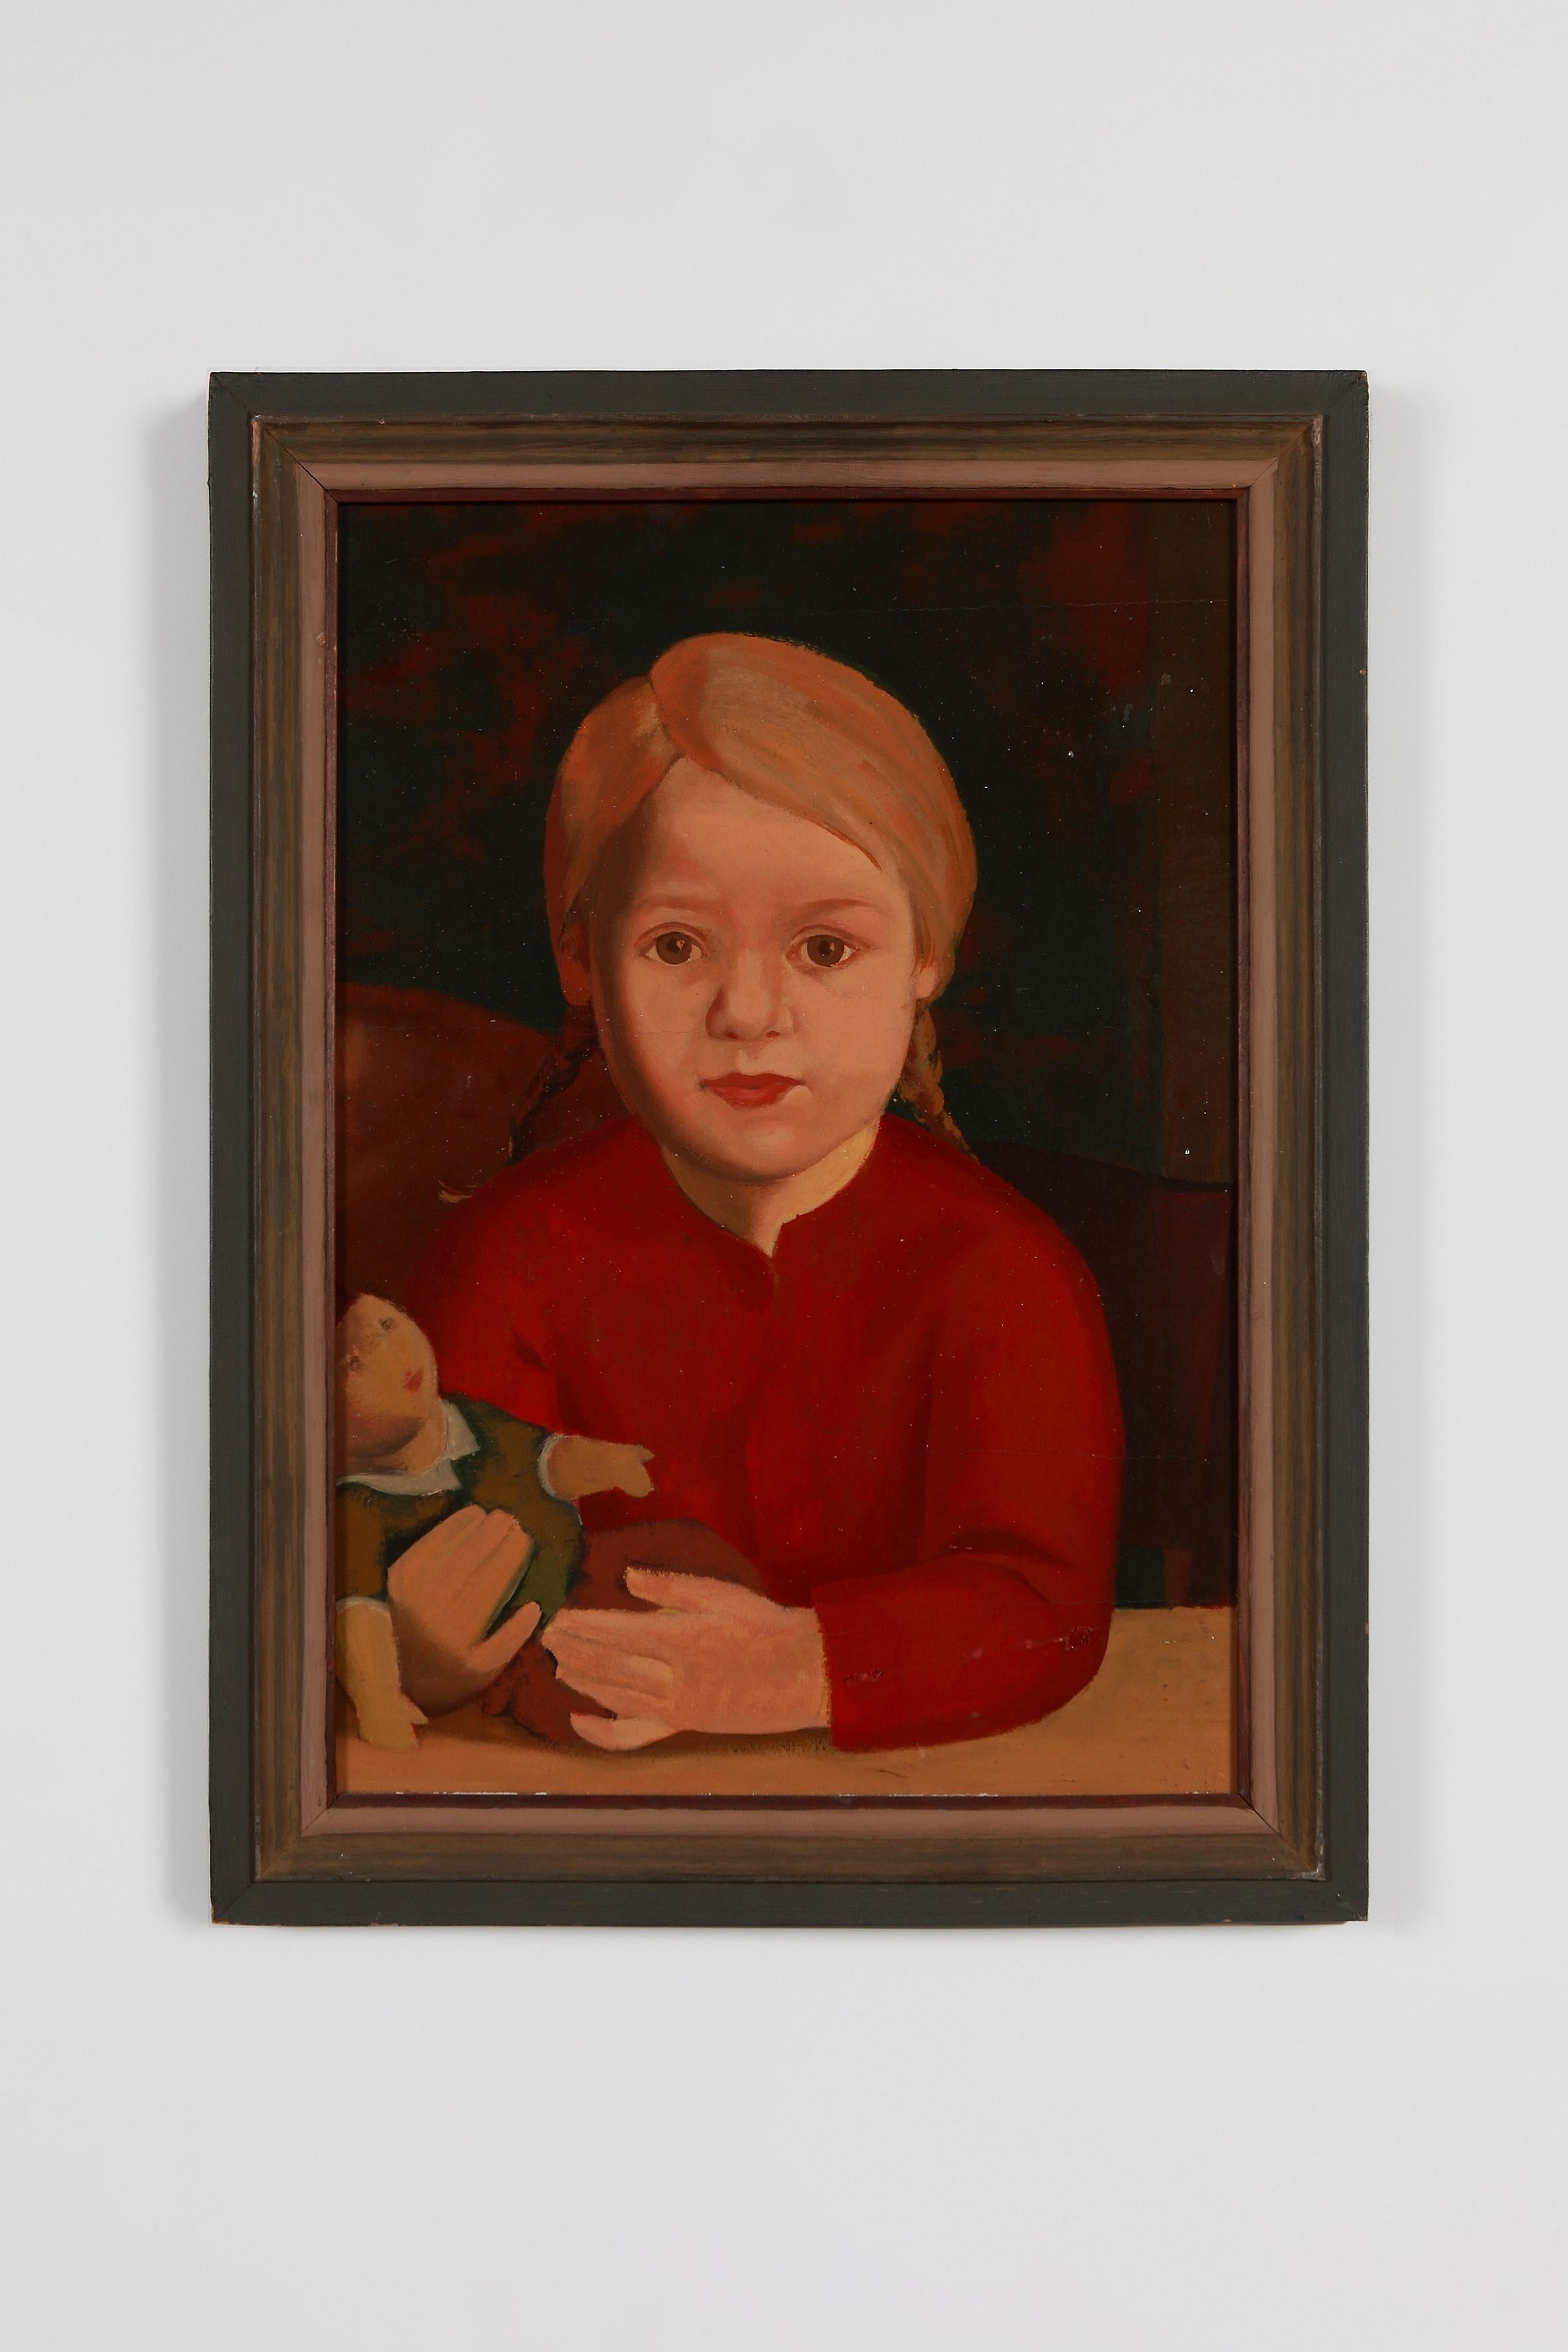 An expressive portrait of a young girl with her doll. Oil on canvas and plywood, around 1928, by Kurt Schütze ( 1902-1971 ), Germany. Signed on the back: K. Schütze. Framed. Height: 18.31 in ( 46,5 cm ), Width: 12.6 in ( 32 cm )
Framed: 25.39 x